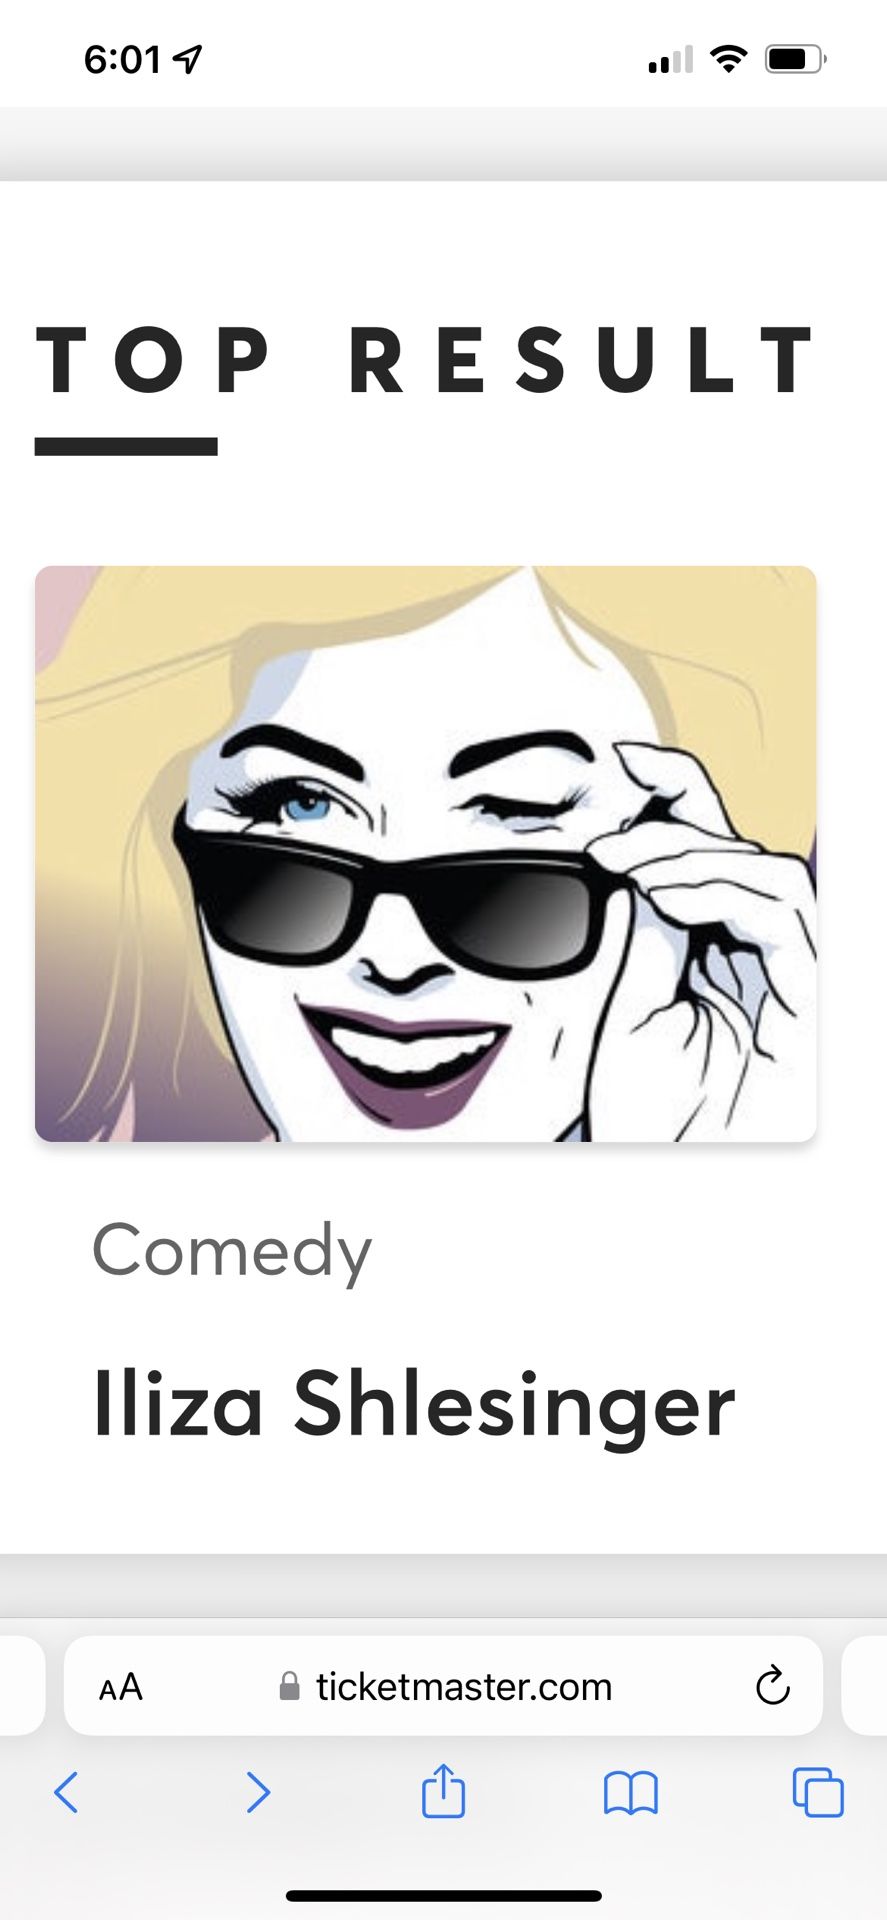 TWO seats - Iliza Comedy Show-Palace Theater OCT 7th $50 Each